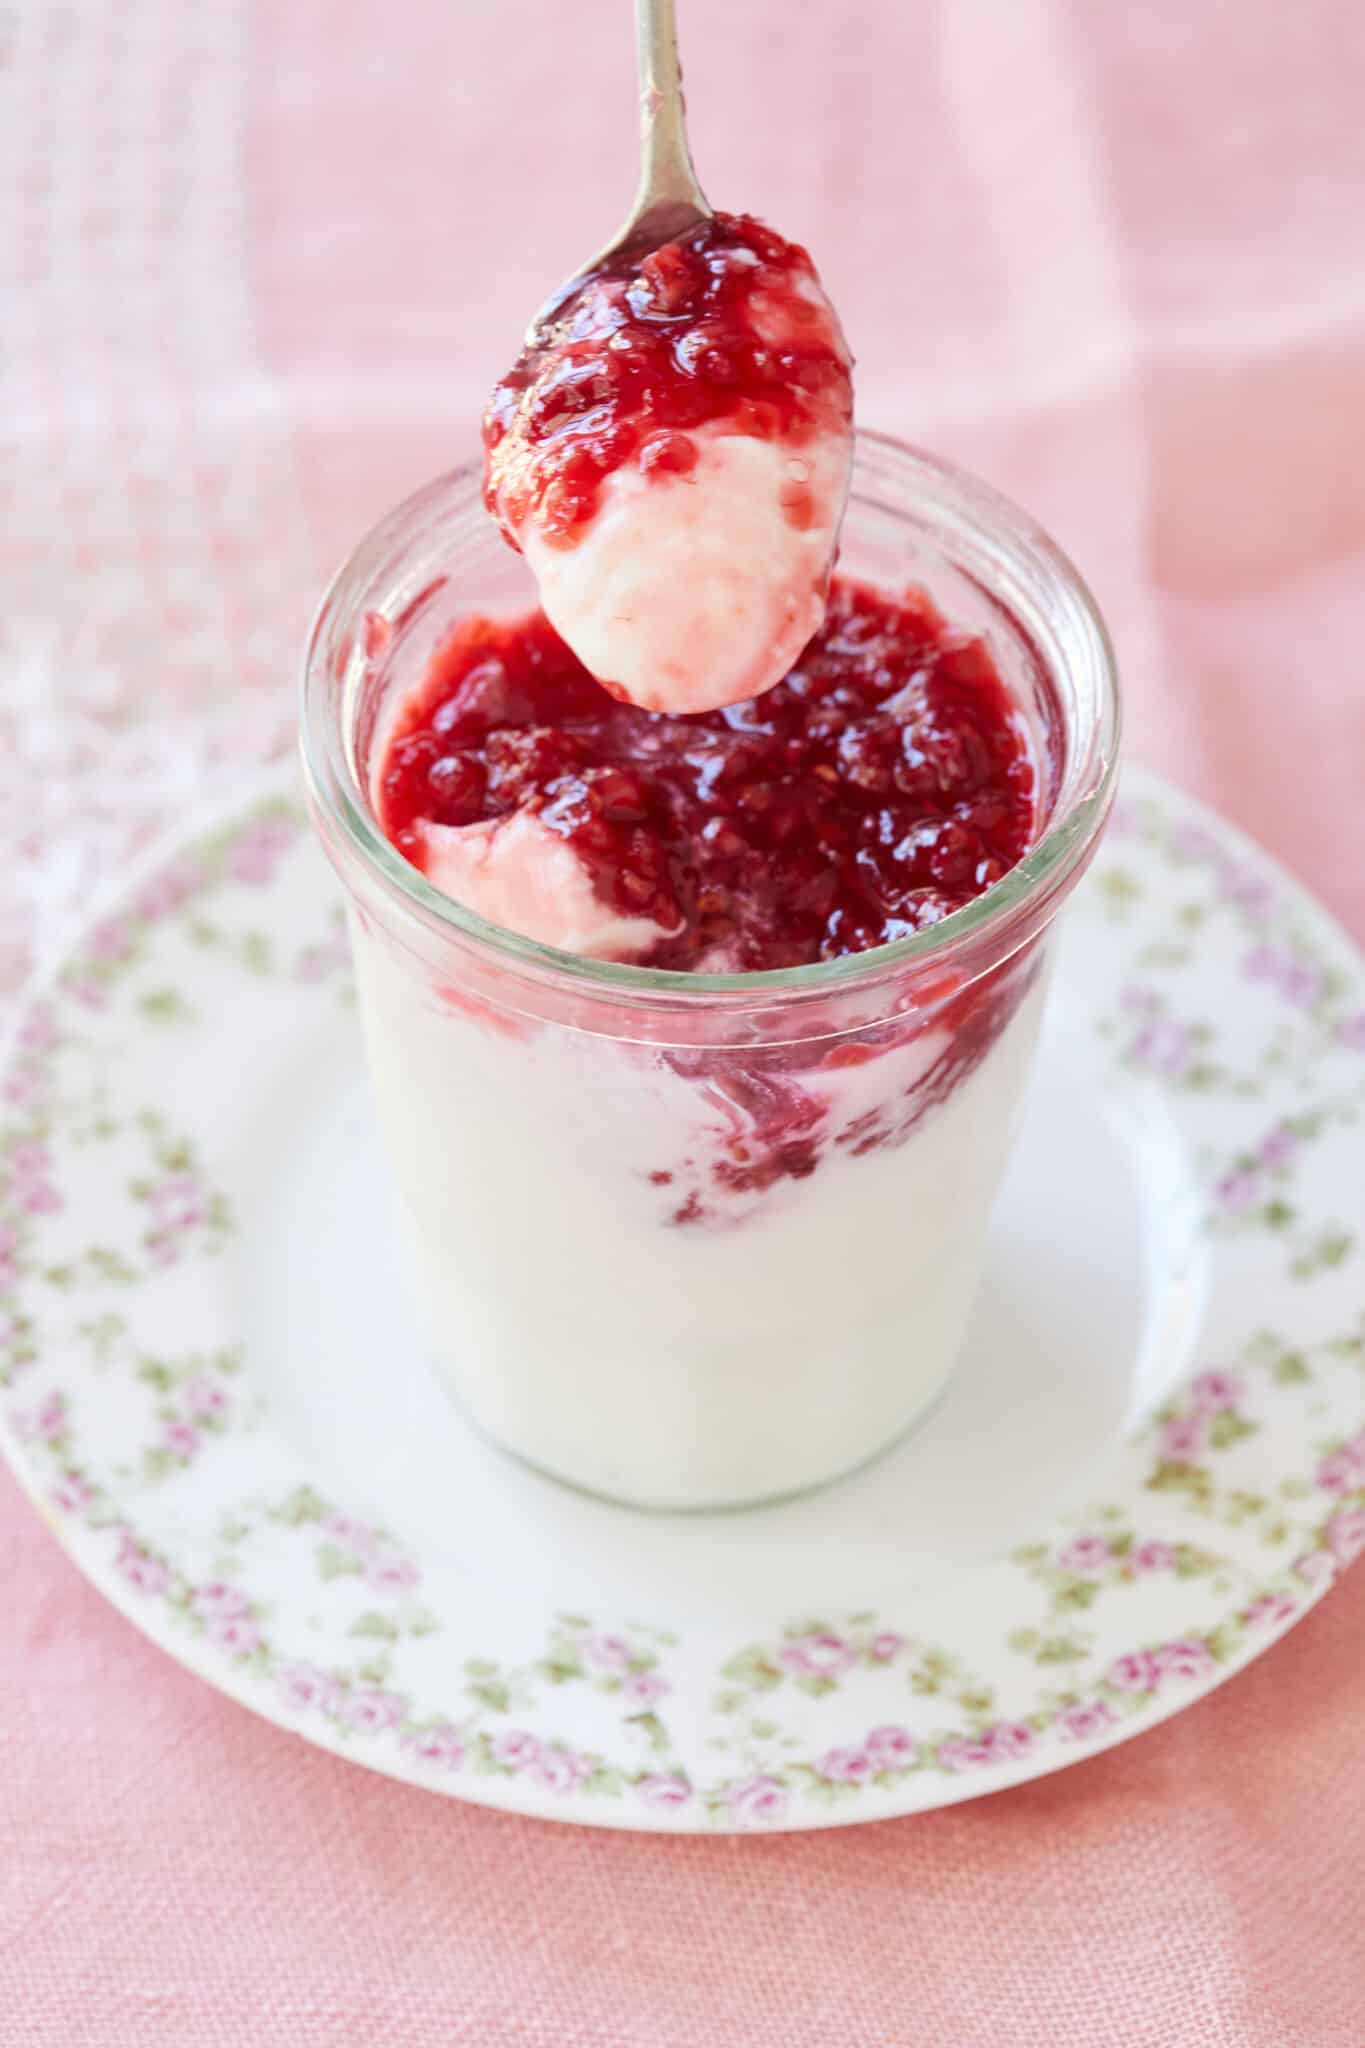 A spoonful of the white silky smooth buttermilk Panna Cotta with glossy vibrant red raspberry jam is being taken from the glass jar. It's served on a floral plate.